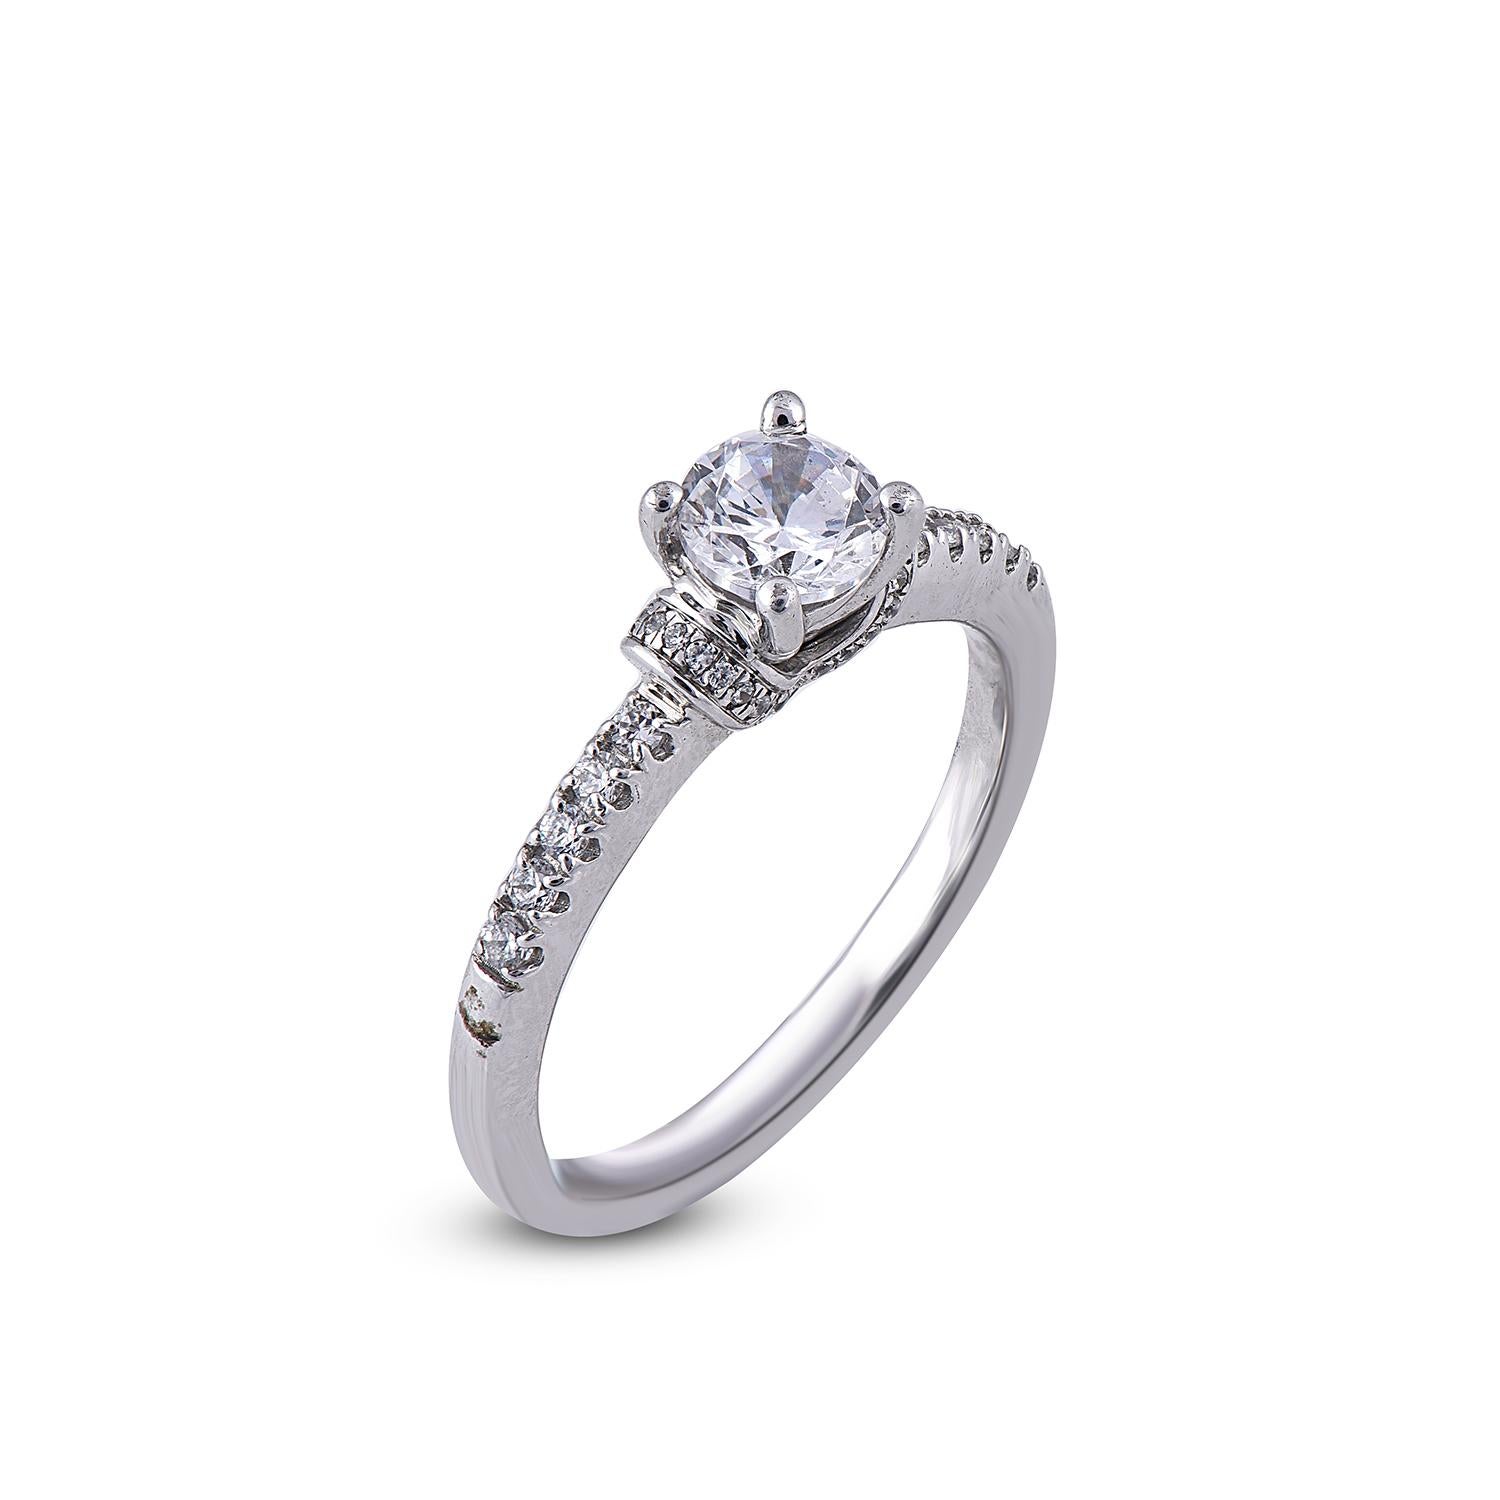 This engagement ring features 0.57ct of center stone and 0.18ct of diamond on shank with 41 round and diamonds set in prong setting and fashioned in 18 karat white gold. Diamonds are graded G-H color and SI1-2 clarity. Ring size is US size 7 and can